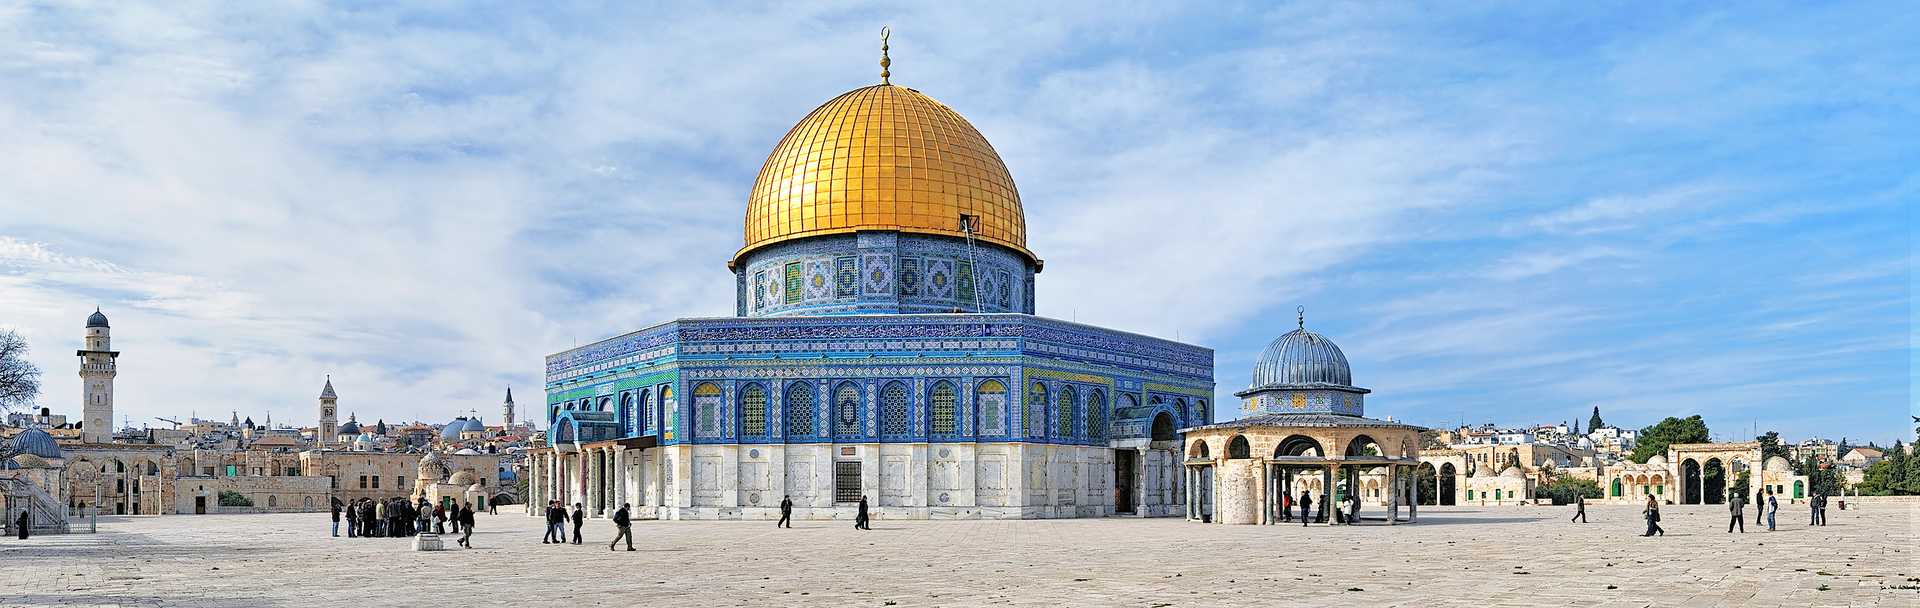 Isreal Tour - Dome of the Rock Mosque in Jerusalem